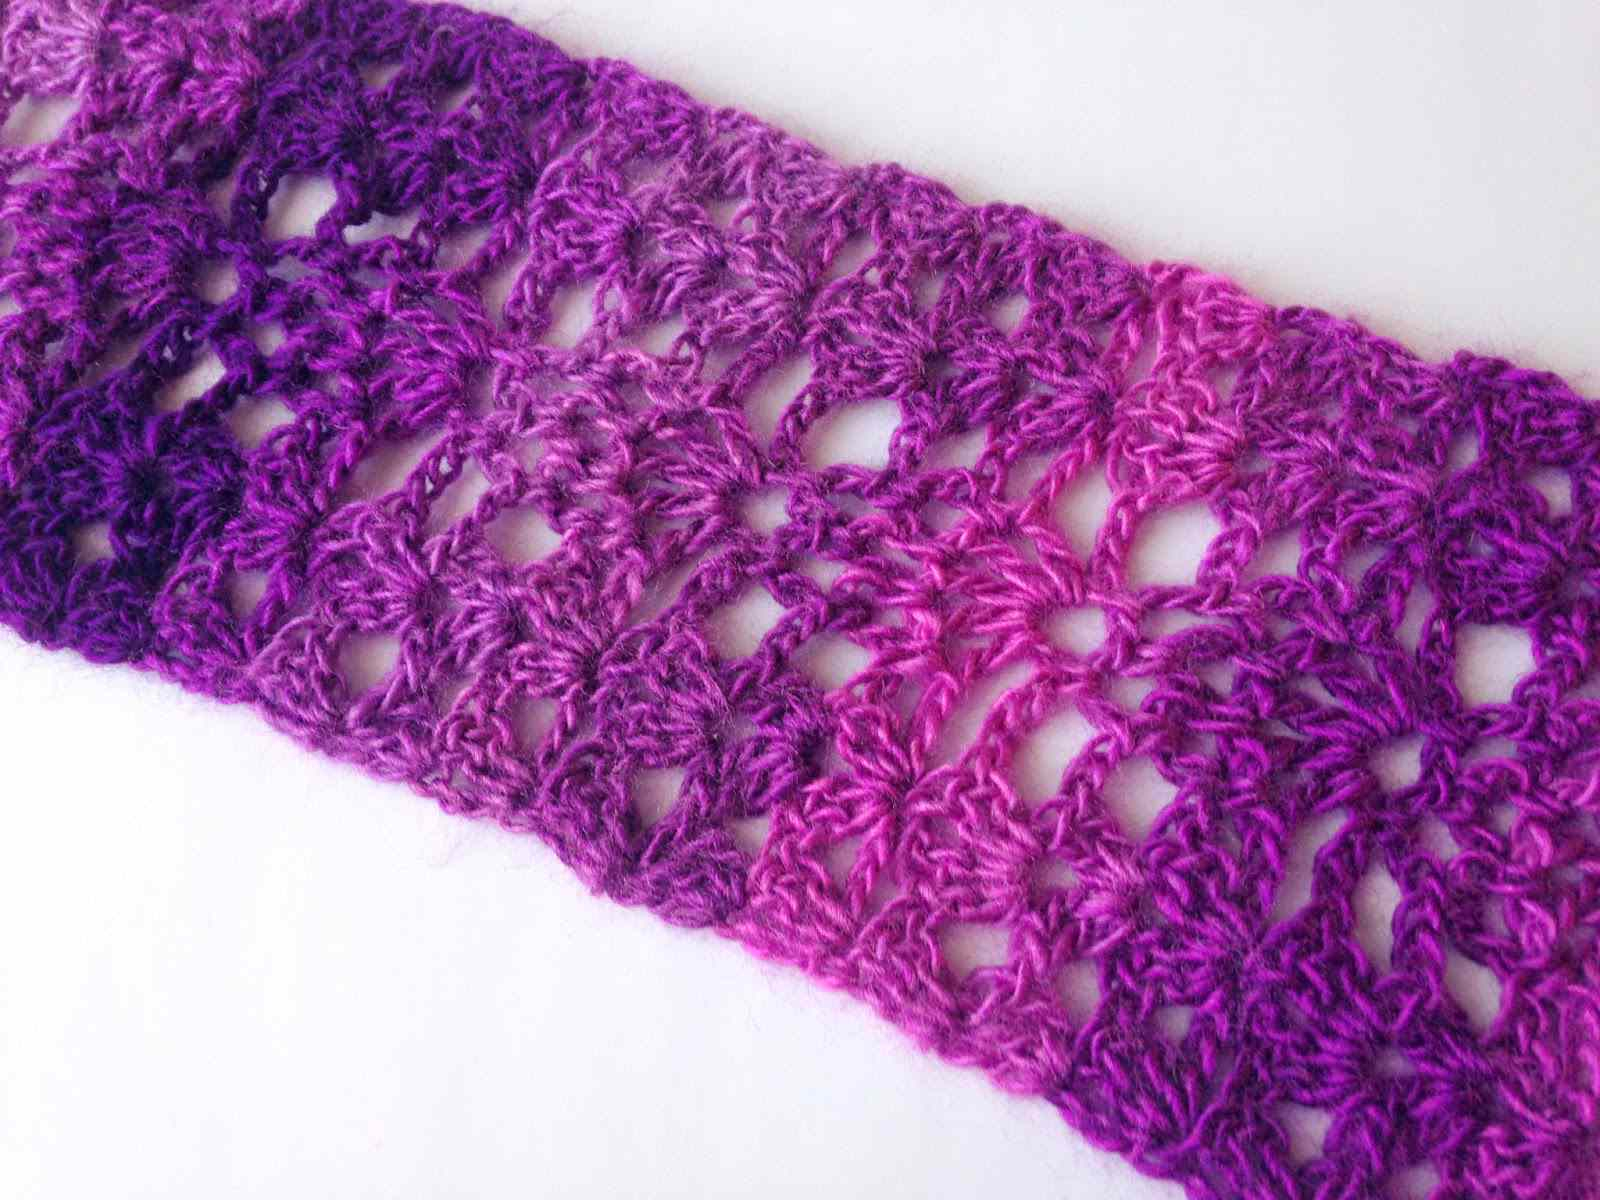 Crocheted Scarf Patterns 10 Easy Free Crochet Lace Scarf Patterns